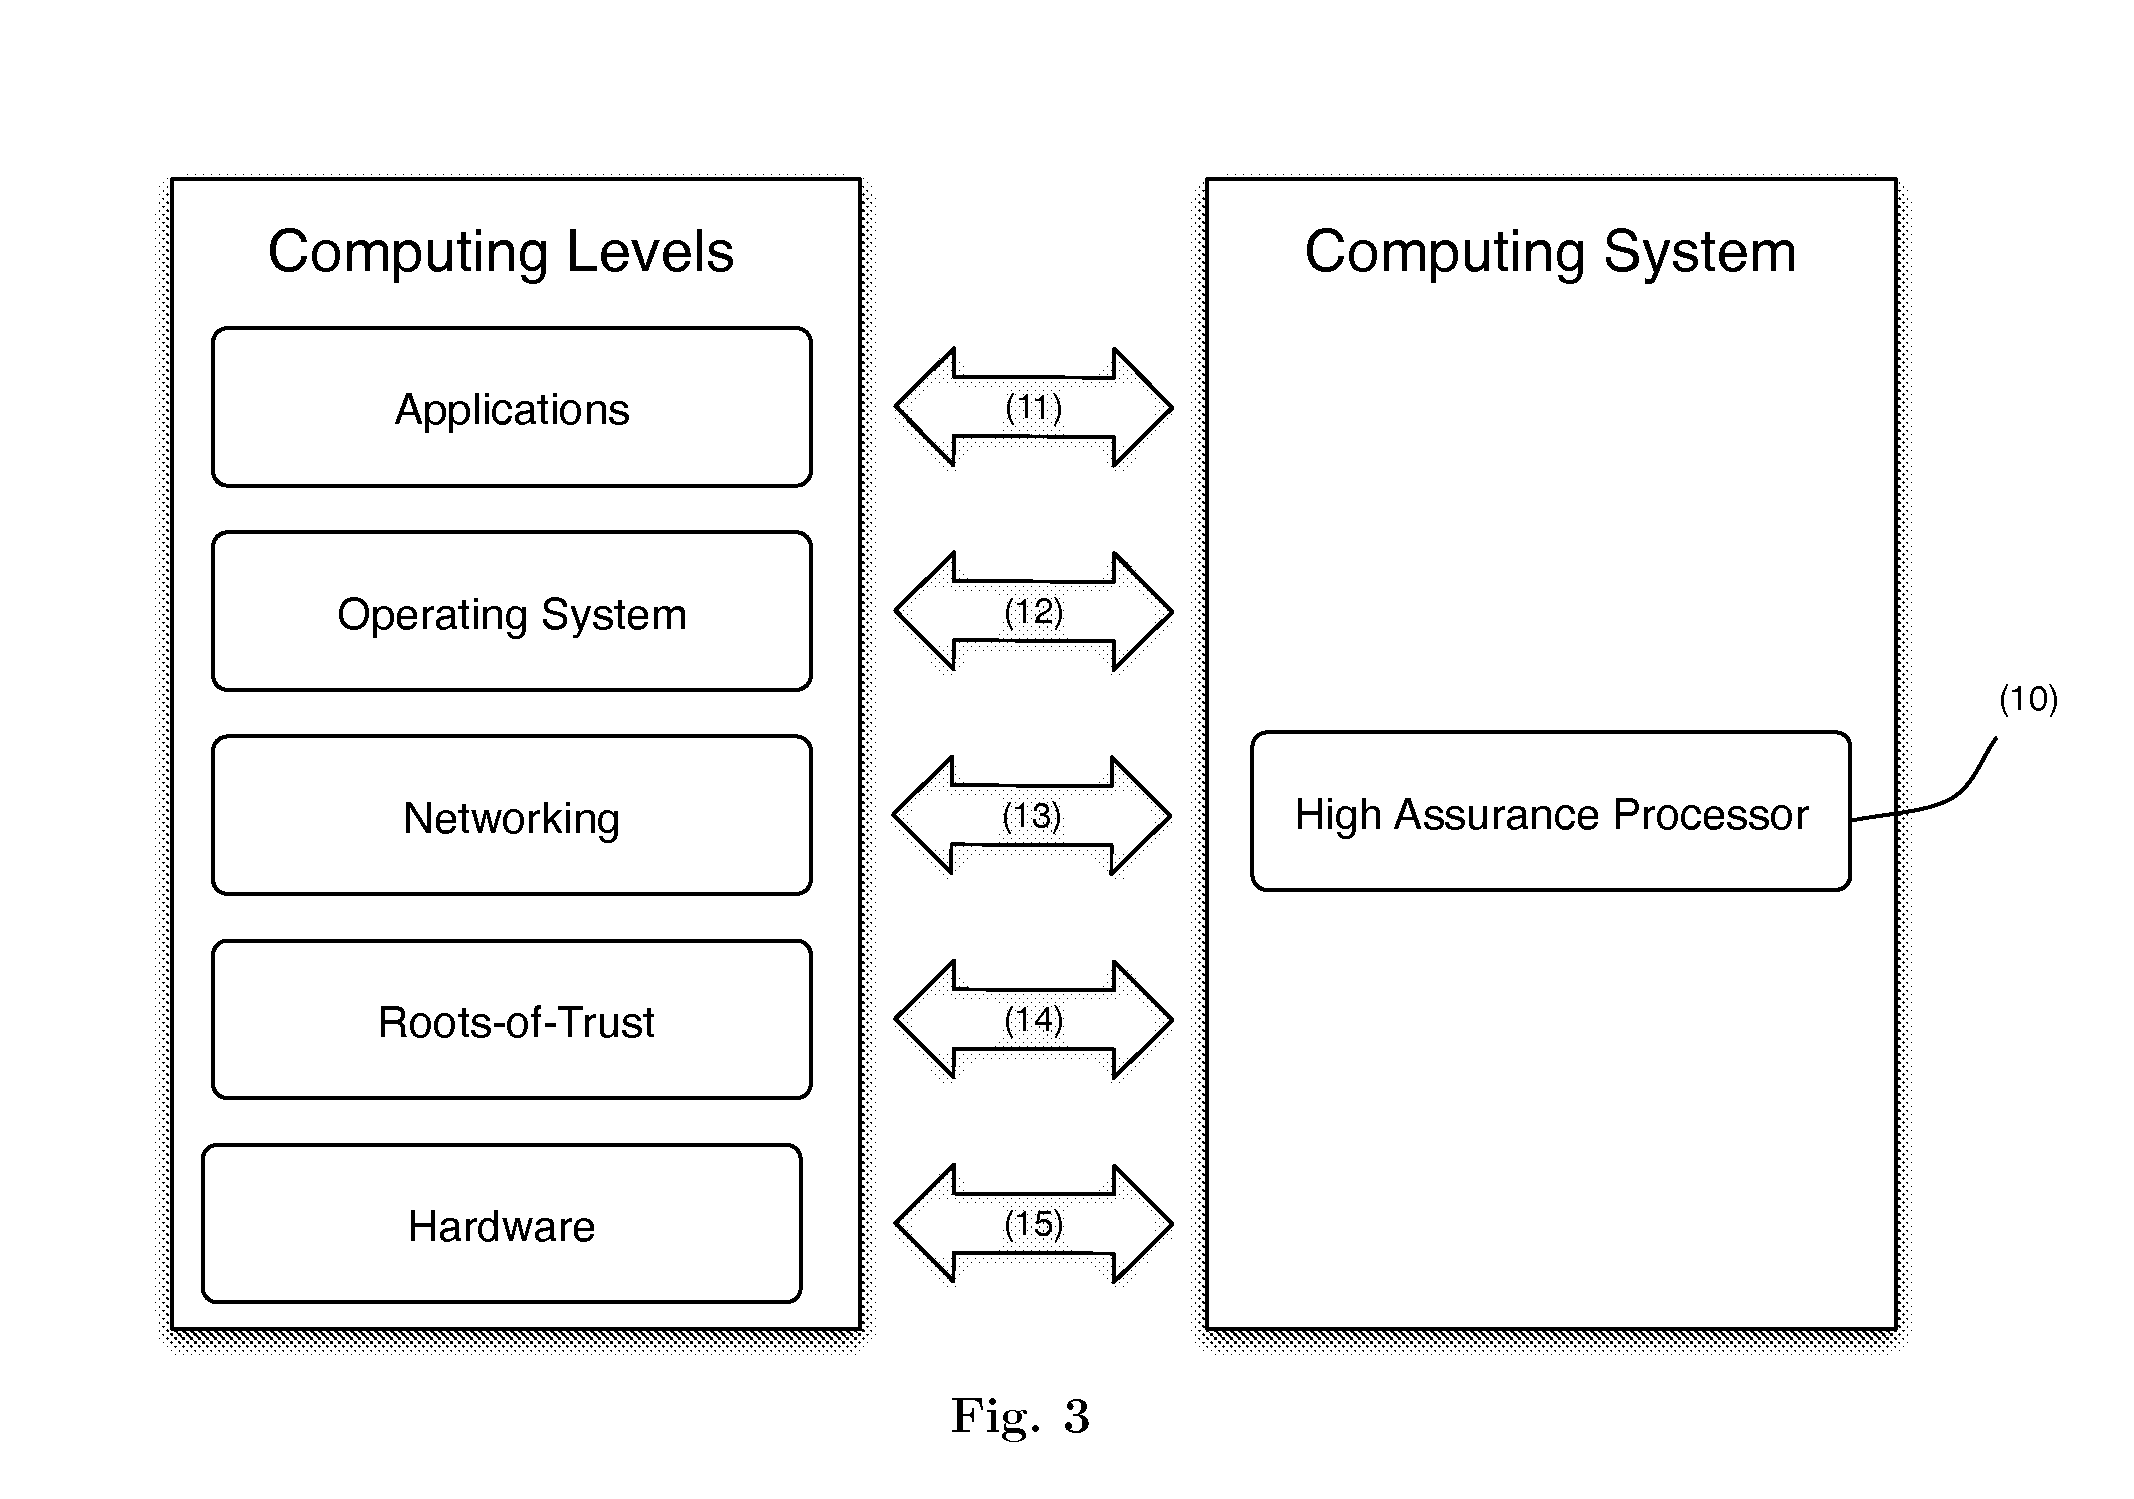 System and device for verifying the integrity of a system from its subcomponents